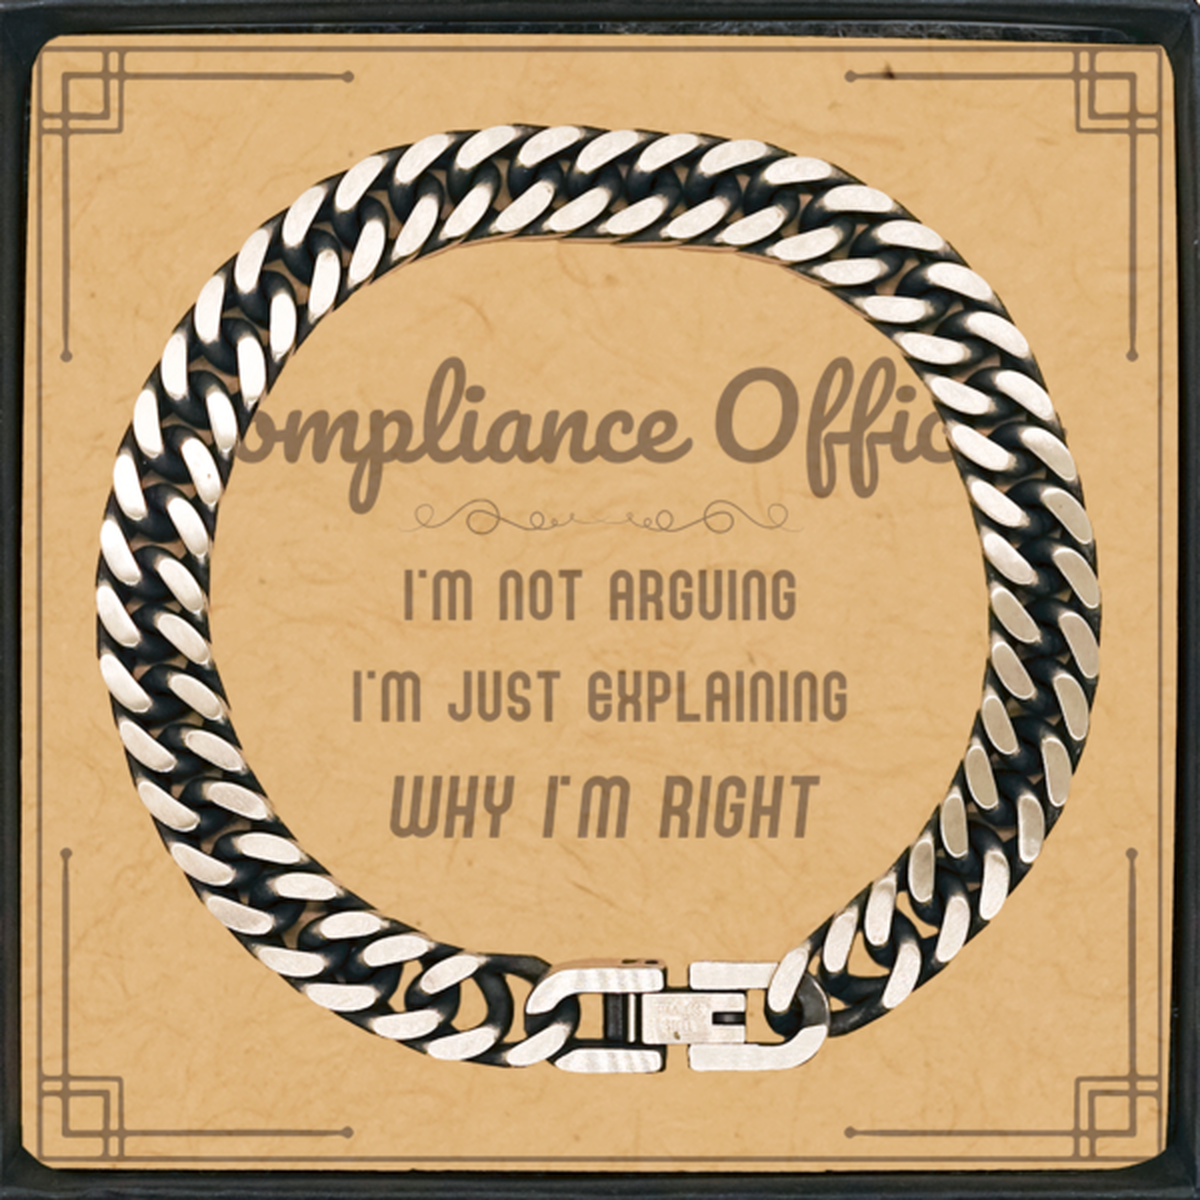 Compliance Officer I'm not Arguing. I'm Just Explaining Why I'm RIGHT Cuban Link Chain Bracelet, Funny Saying Quote Compliance Officer Gifts For Compliance Officer Message Card Graduation Birthday Christmas Gifts for Men Women Coworker